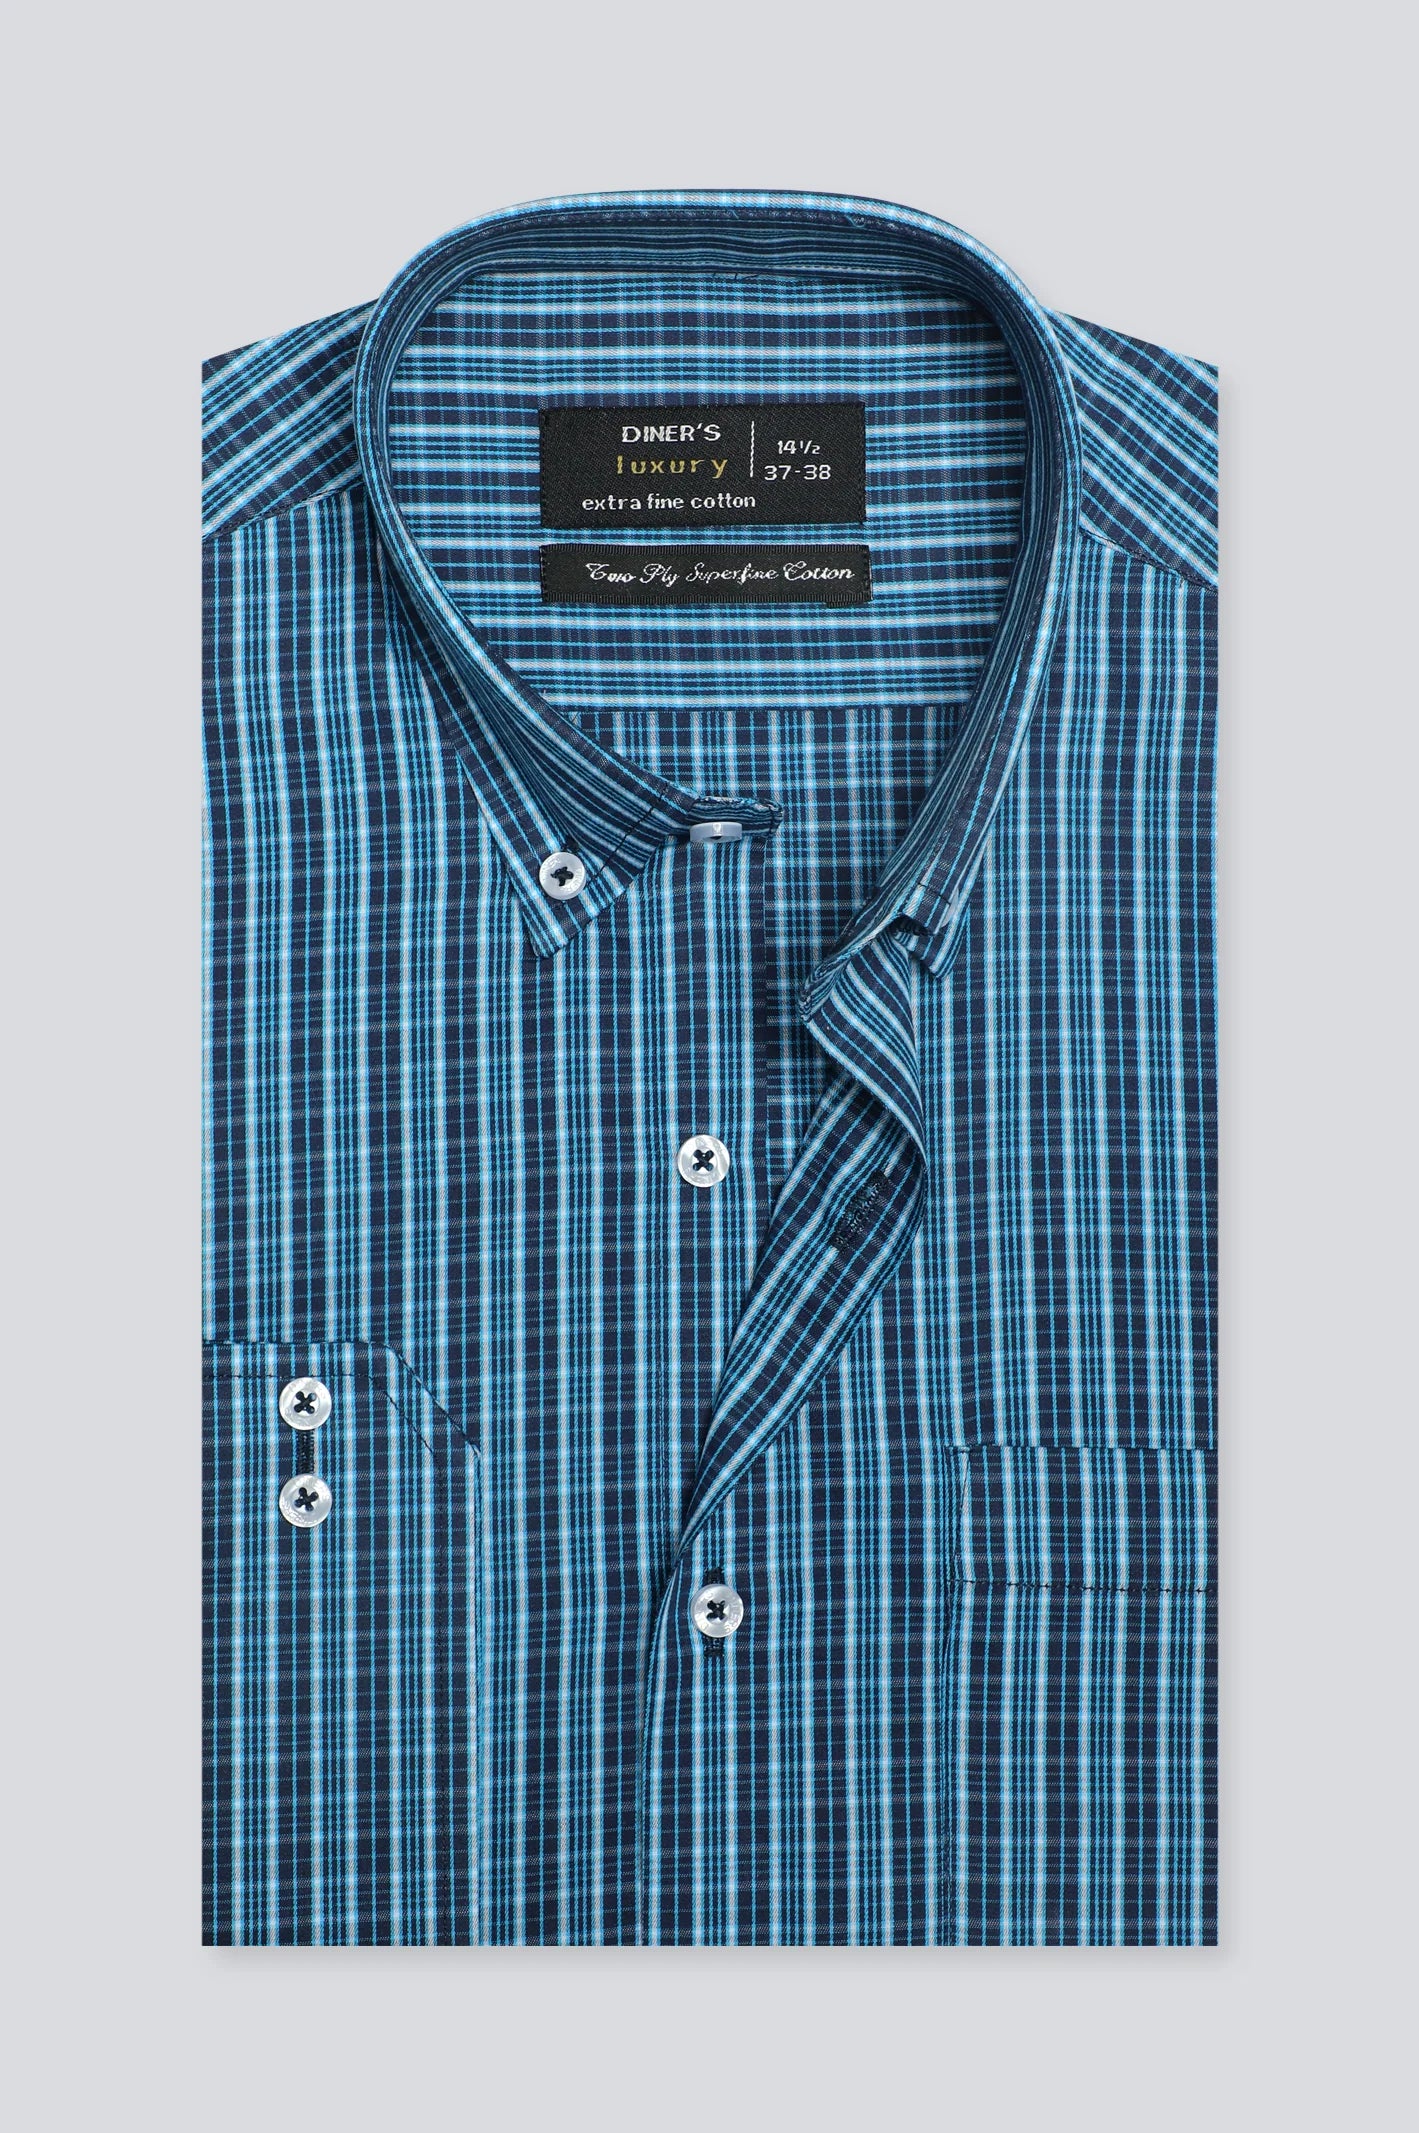 Multicolor Glen plaid Check Formal Shirt From Diners